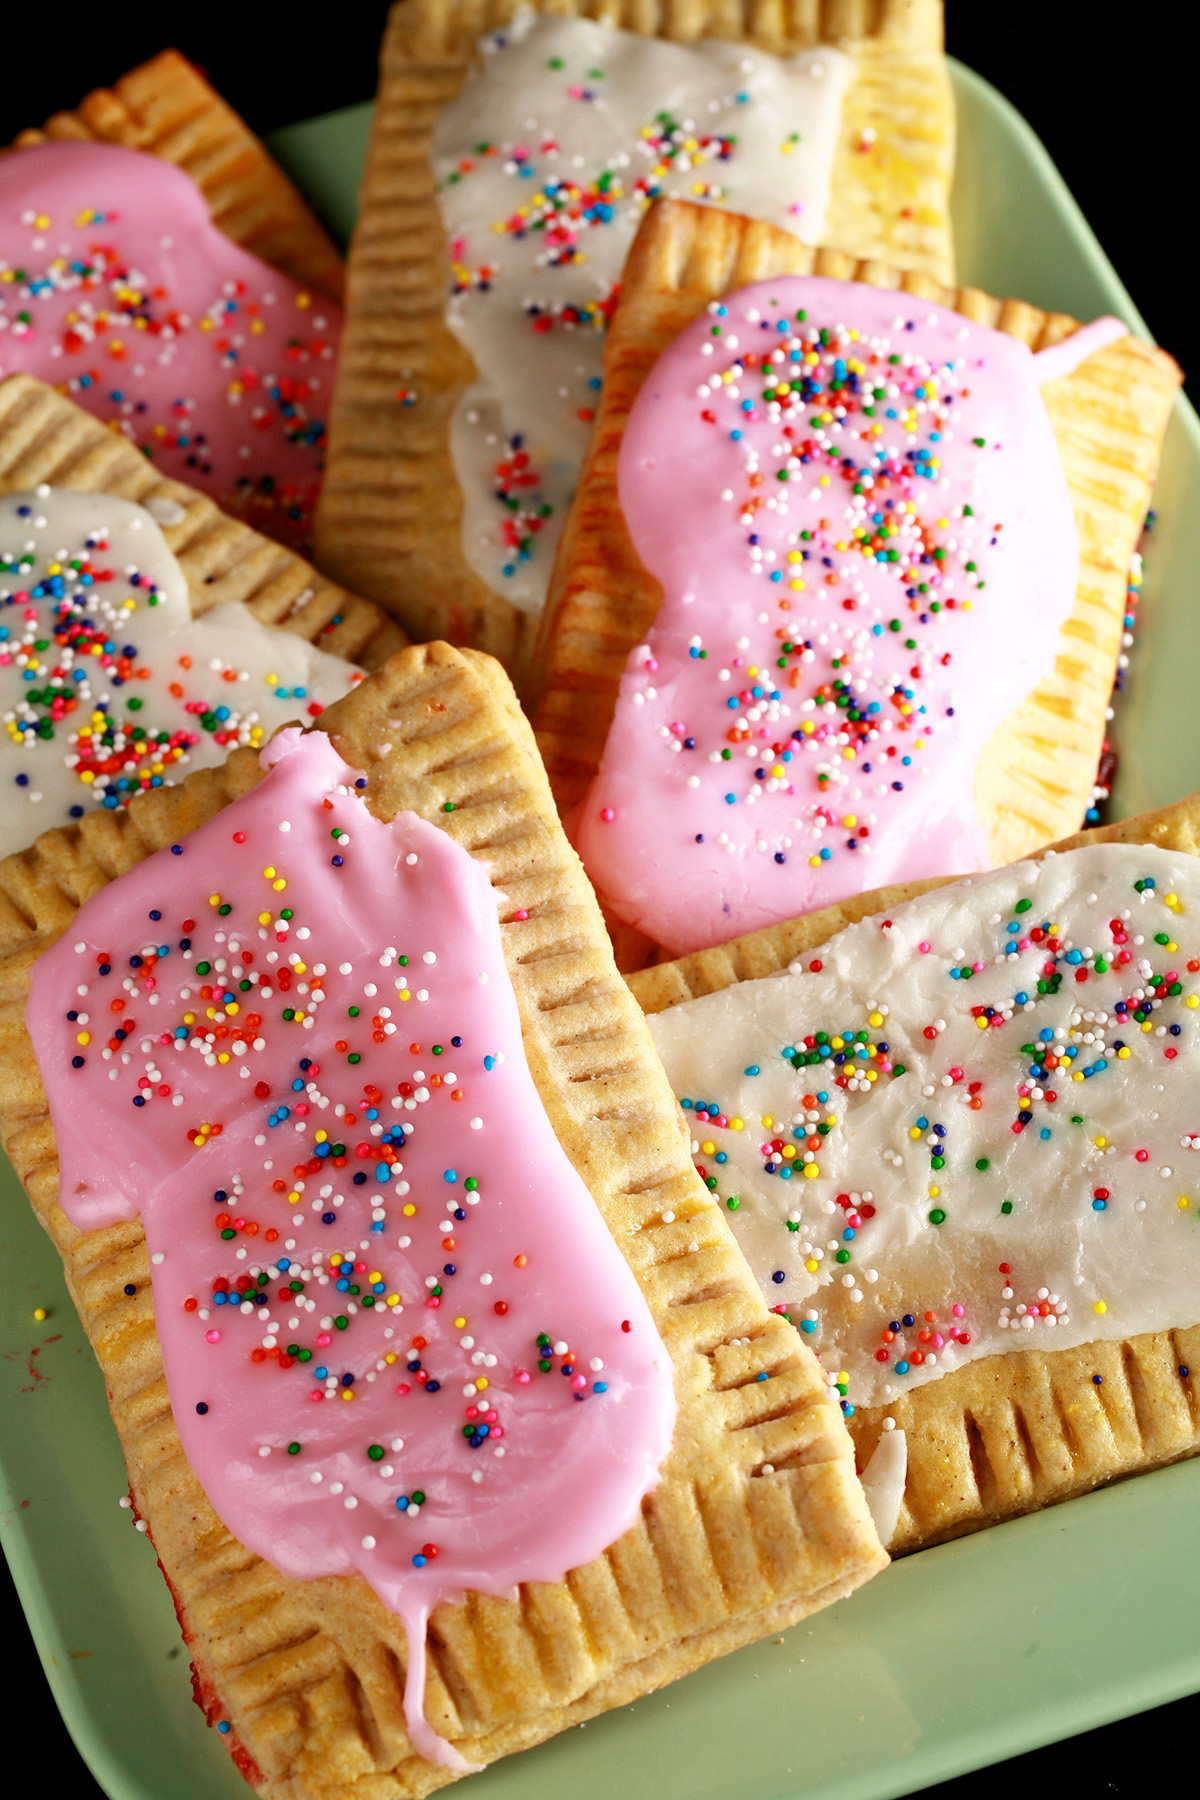 A plate of toaster pastries made from this gluten-free poptarts recipe. They are frosted with pink and white icing, and topped with coloured sprinkles.